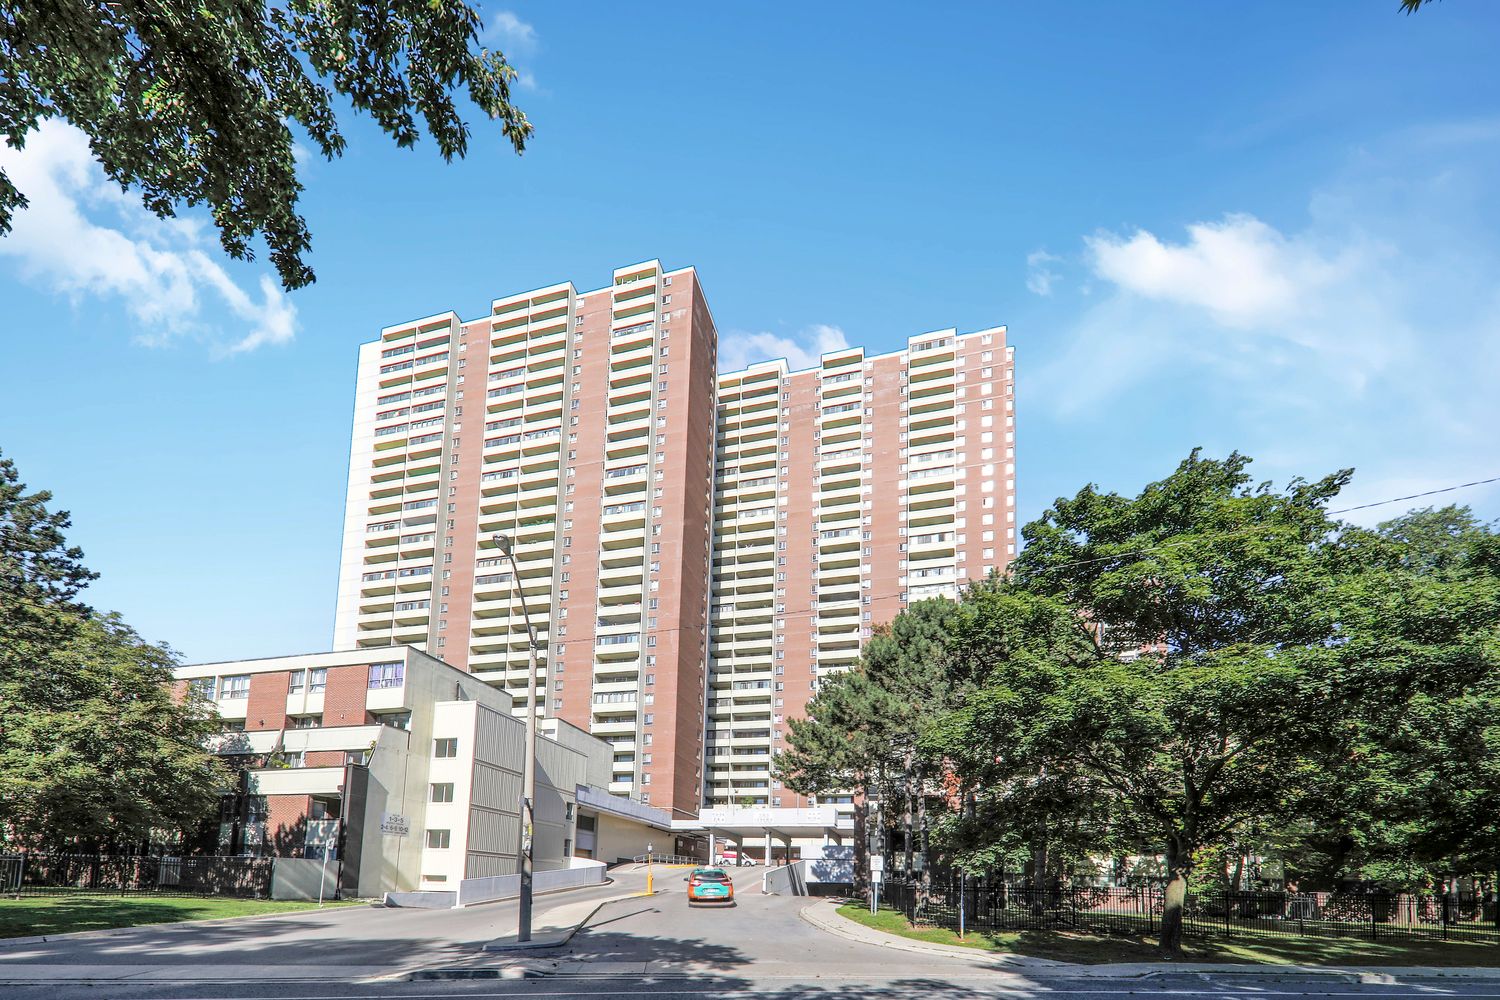 6-12 Crescent Town Road. Crescent Town Condos is located in  East York, Toronto - image #1 of 4